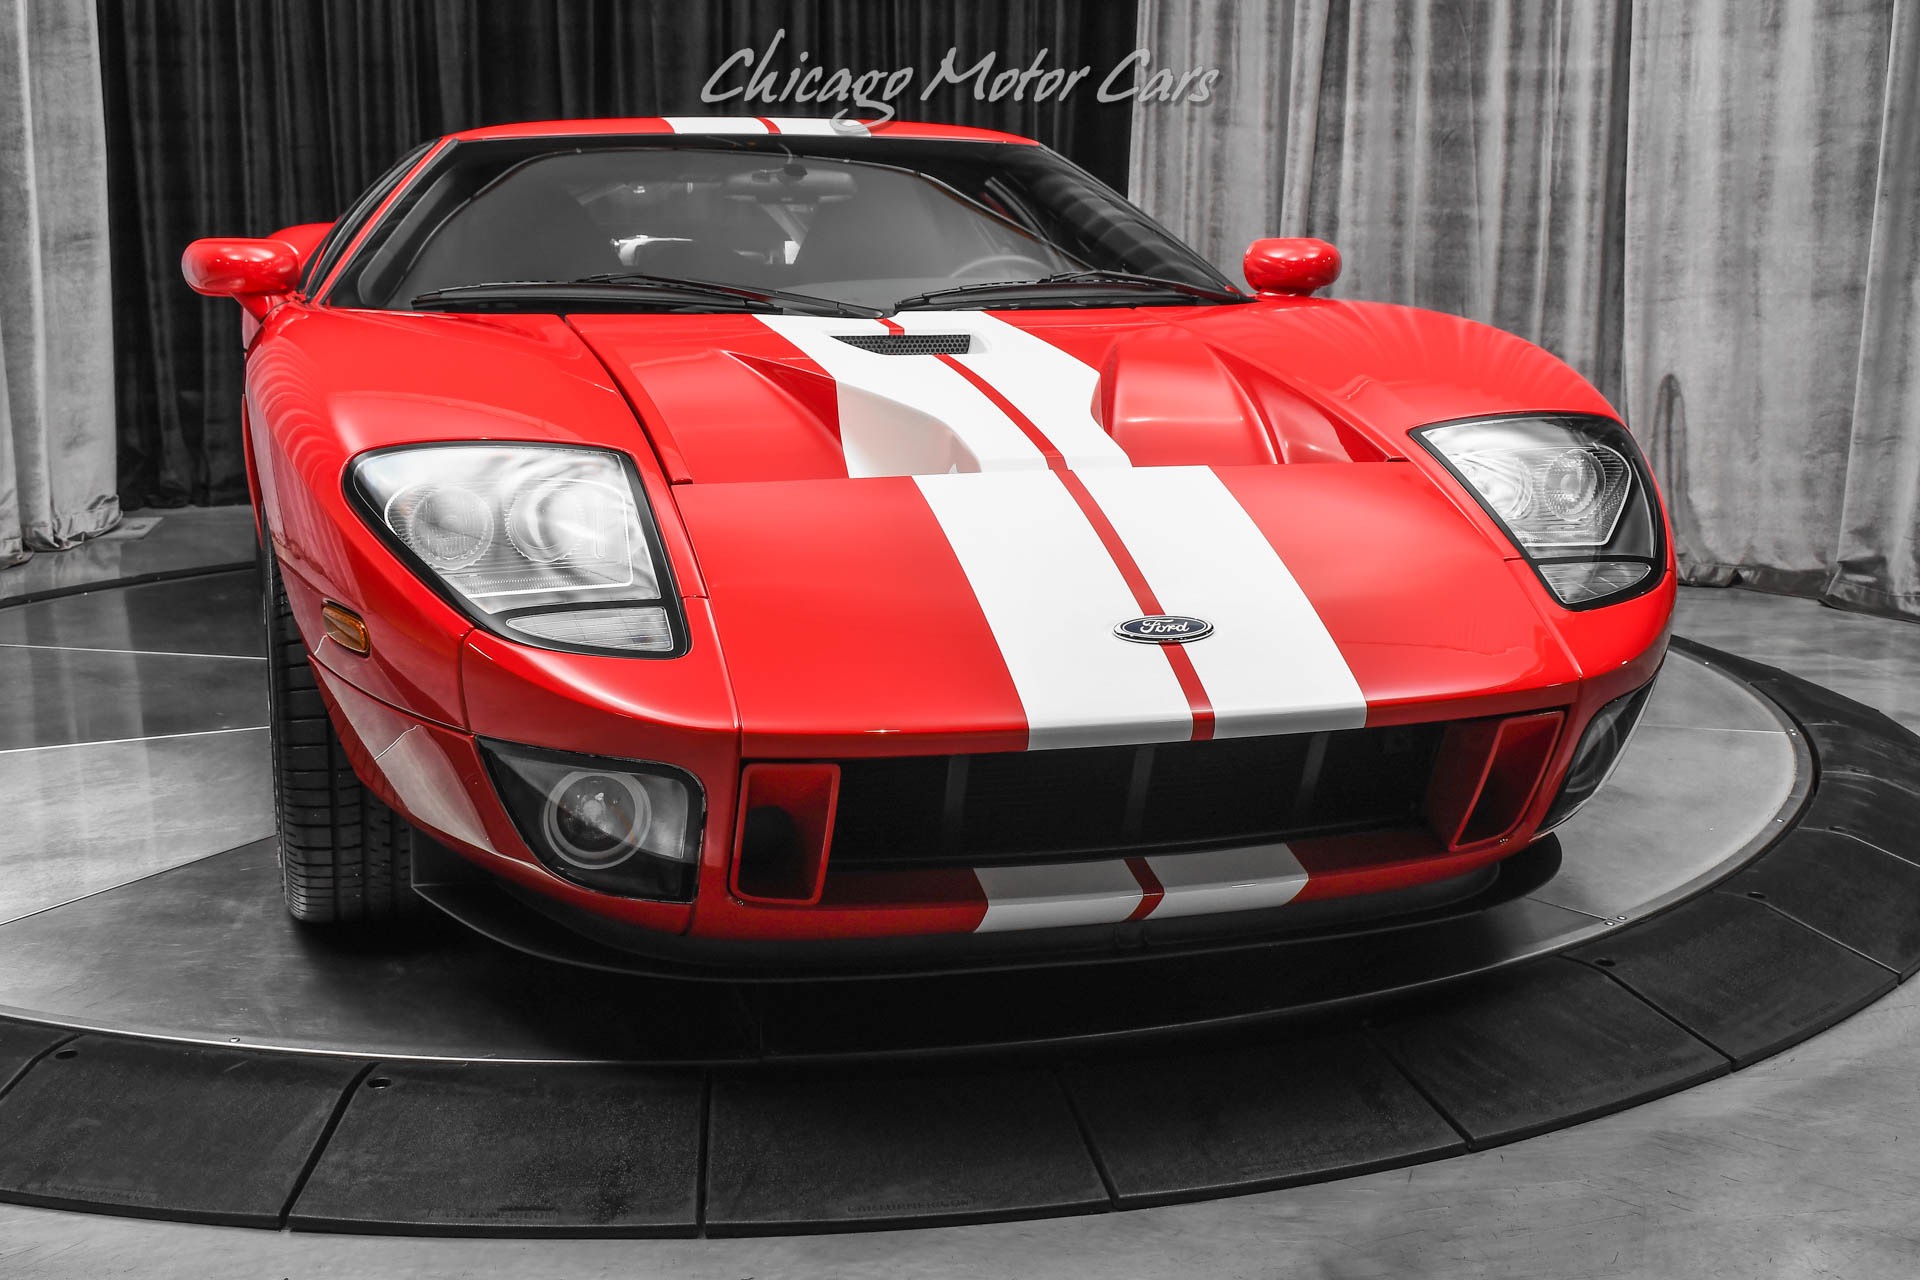 Used-2006-Ford-GT-Coupe-ONLY-1300-Miles-4-Option-Car-Collector-Quality-Example-STUNNING